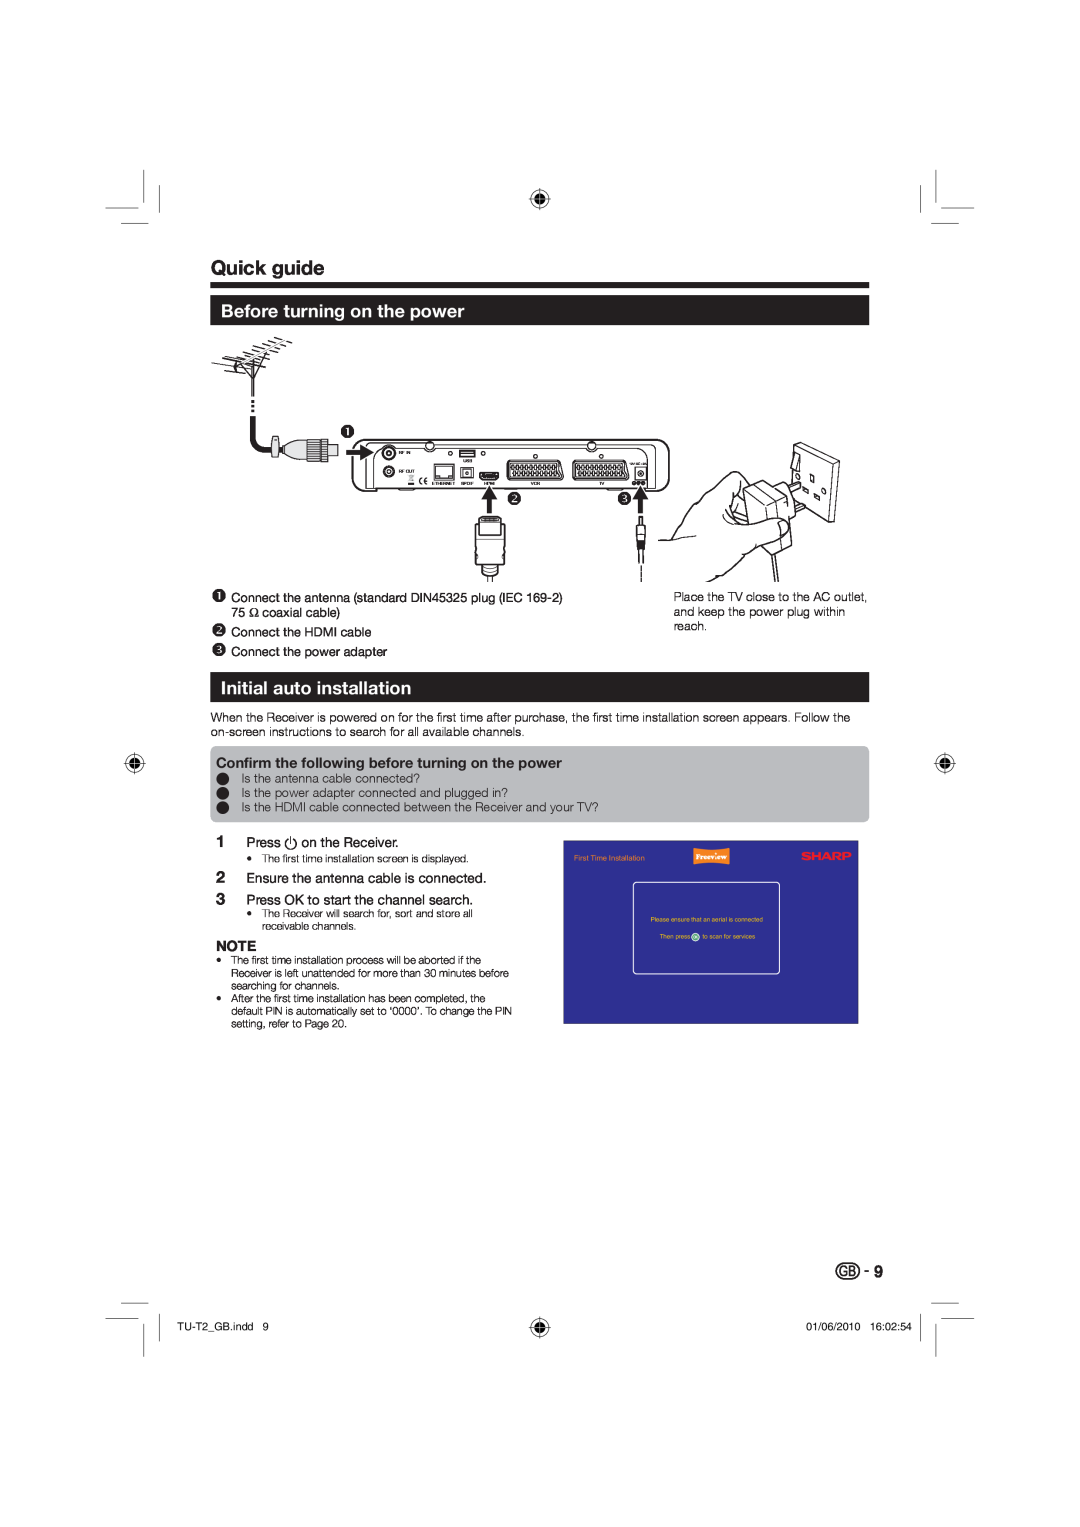 Sharp TU-T2 operation manual Quick guide, Before turning on the power, Initial auto installation, Press a on the Receiver 